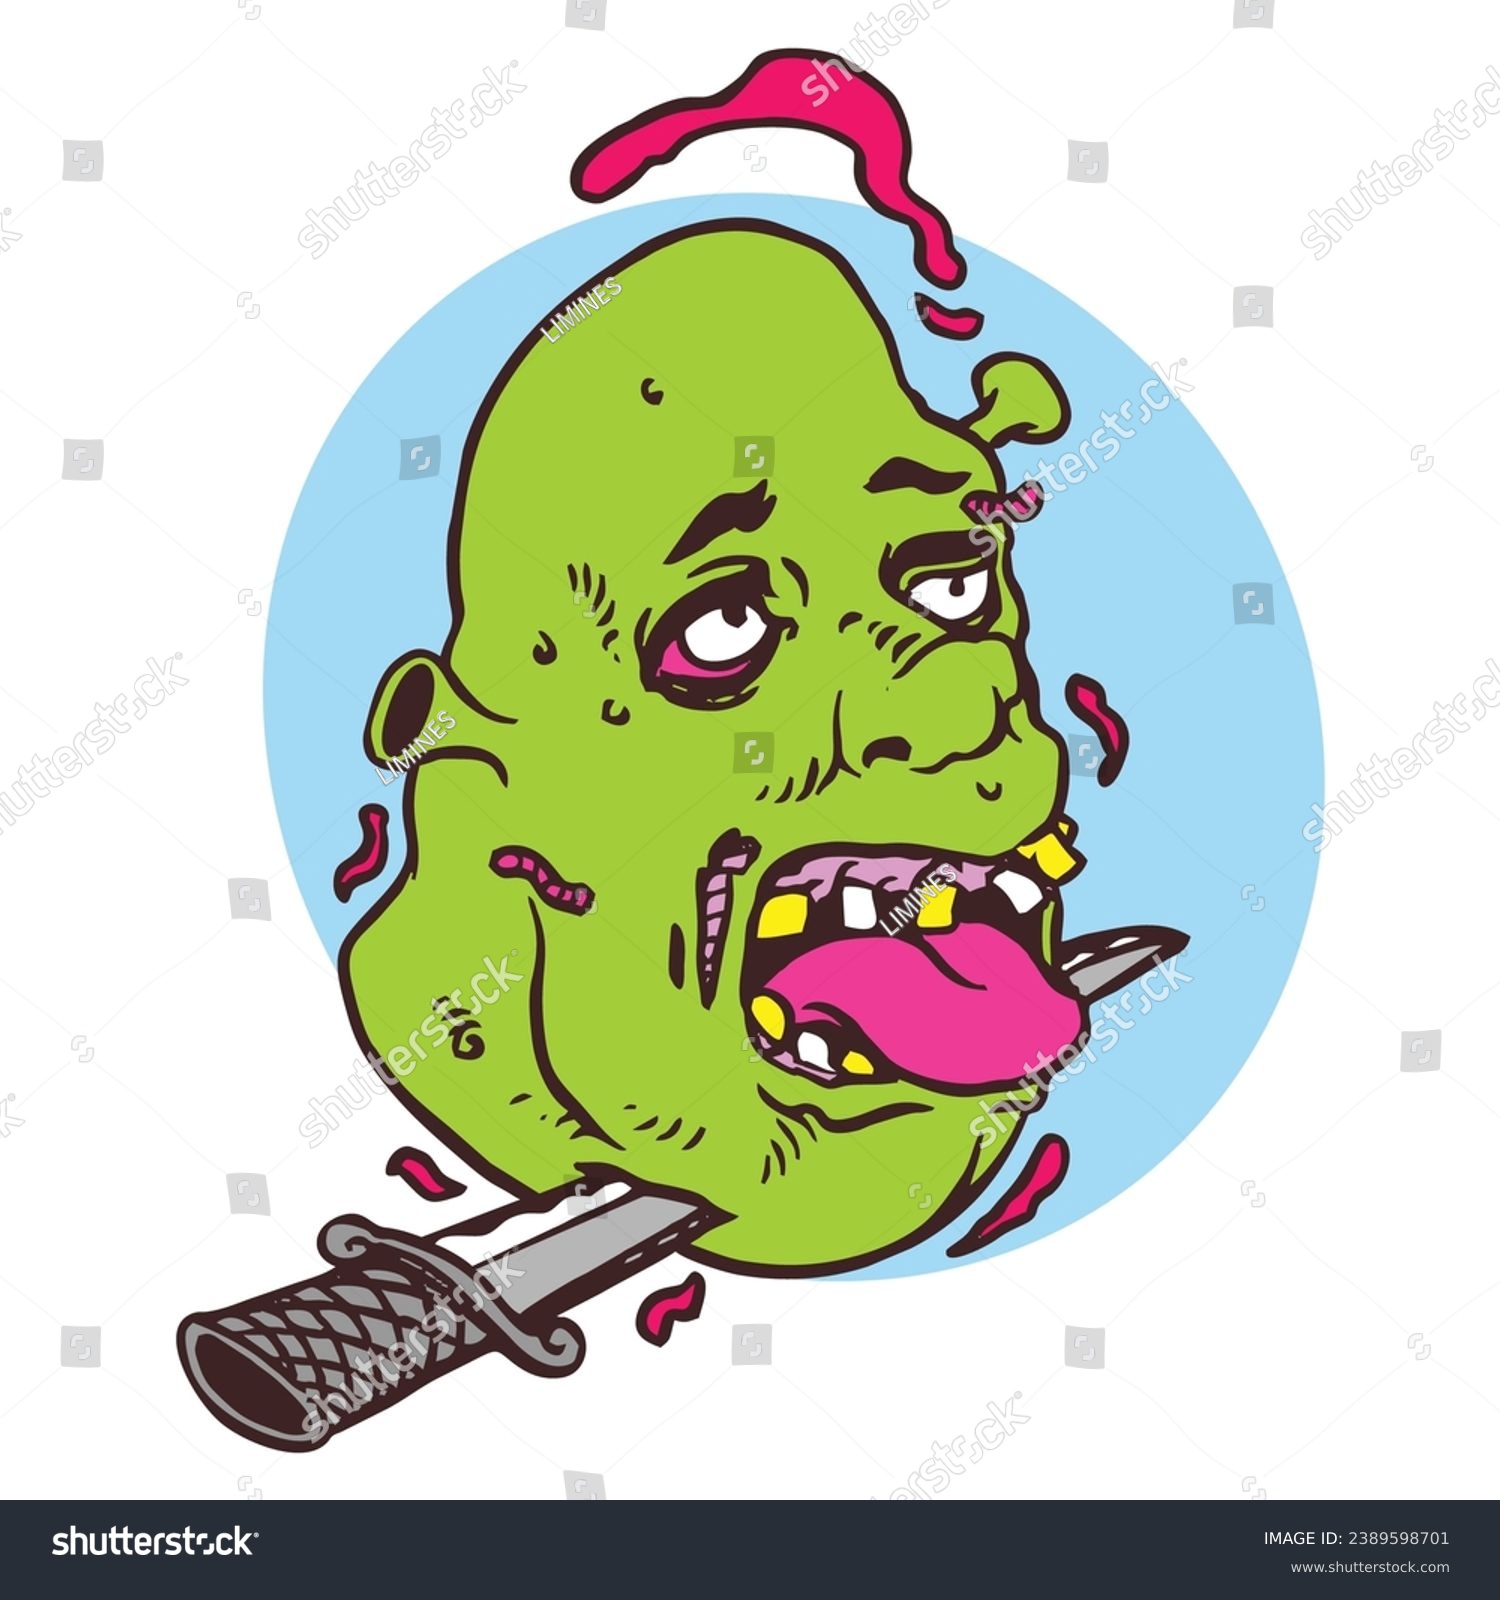 SVG of  Shrek zombie cartoons are good for posters and decoration in your room or even for merchandise svg